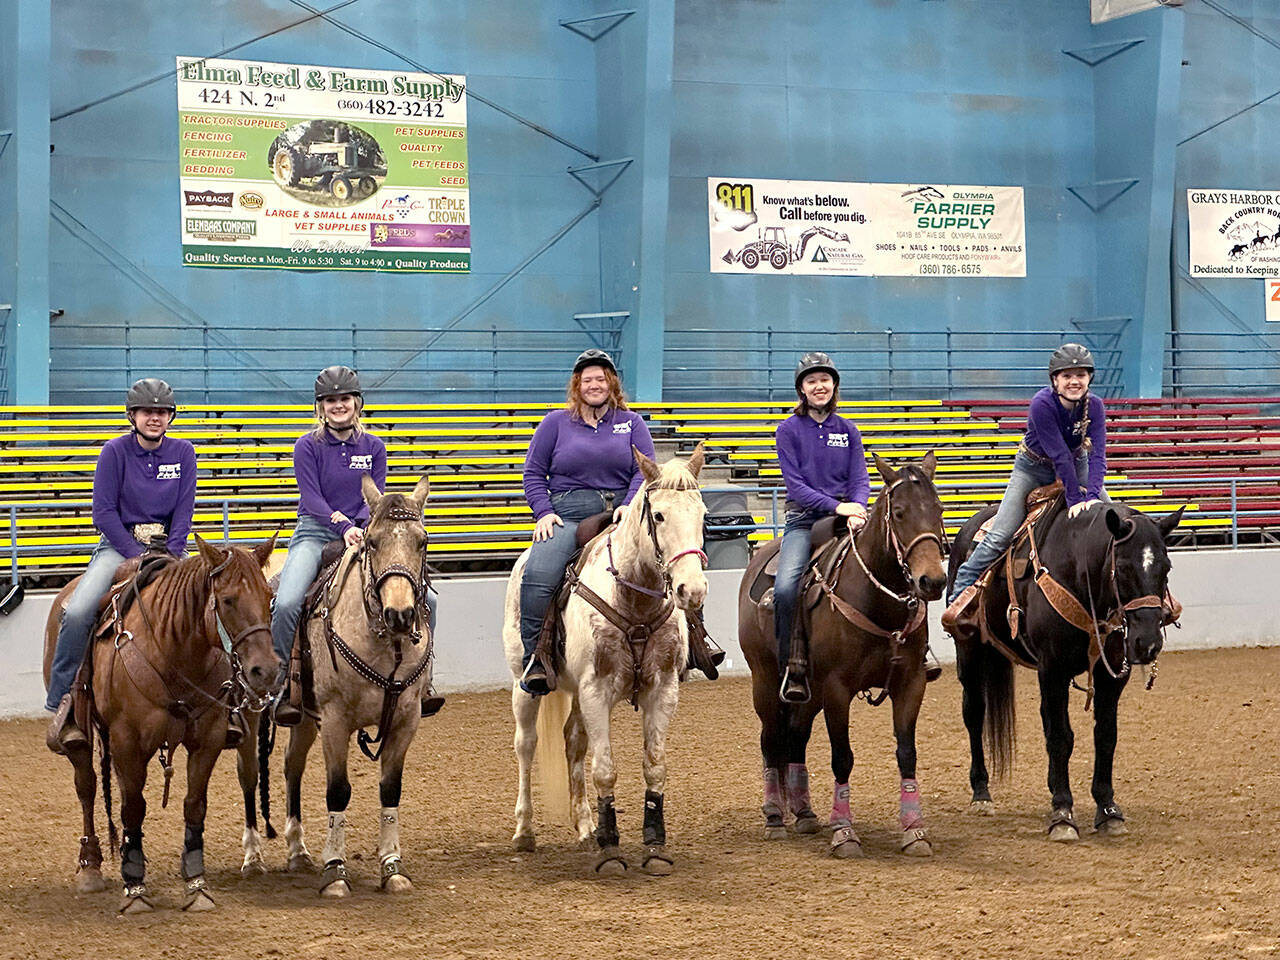 Sequim’s high school equestrian team brought home a whopping 12 first place wins at the first WAHSET meet of the season, from Left: Libby Swanberg , Kennady Gilbertson, Joanna Seelye, Katelynn Middleton-Sharpe and Asha Swanberg. (Submitted photo Anna Swanberg)